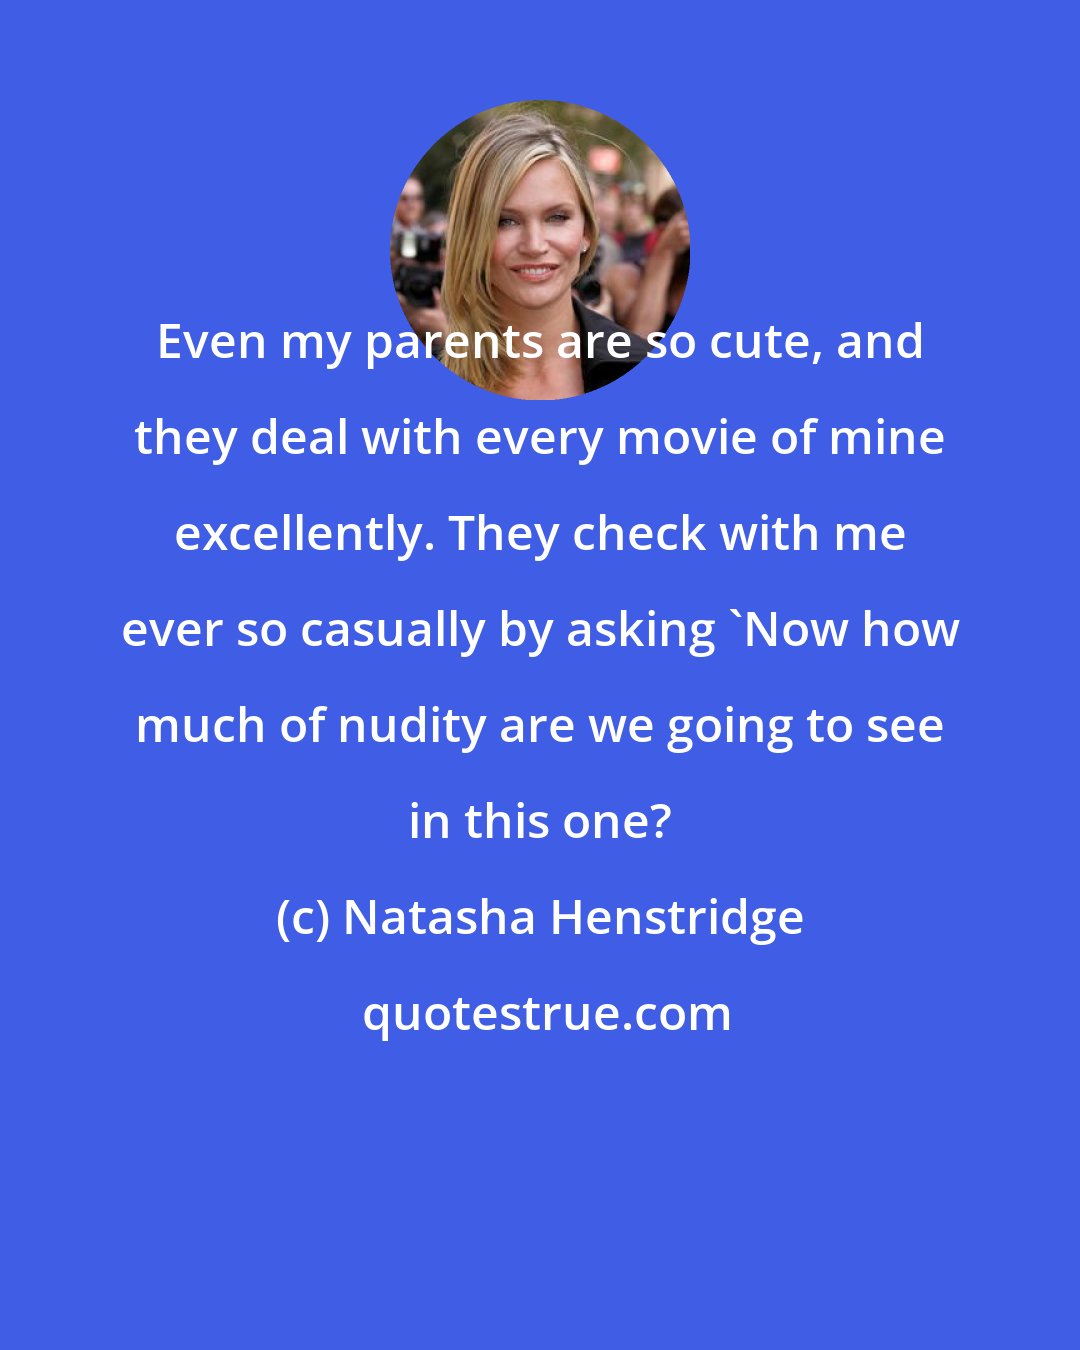 Natasha Henstridge: Even my parents are so cute, and they deal with every movie of mine excellently. They check with me ever so casually by asking 'Now how much of nudity are we going to see in this one?